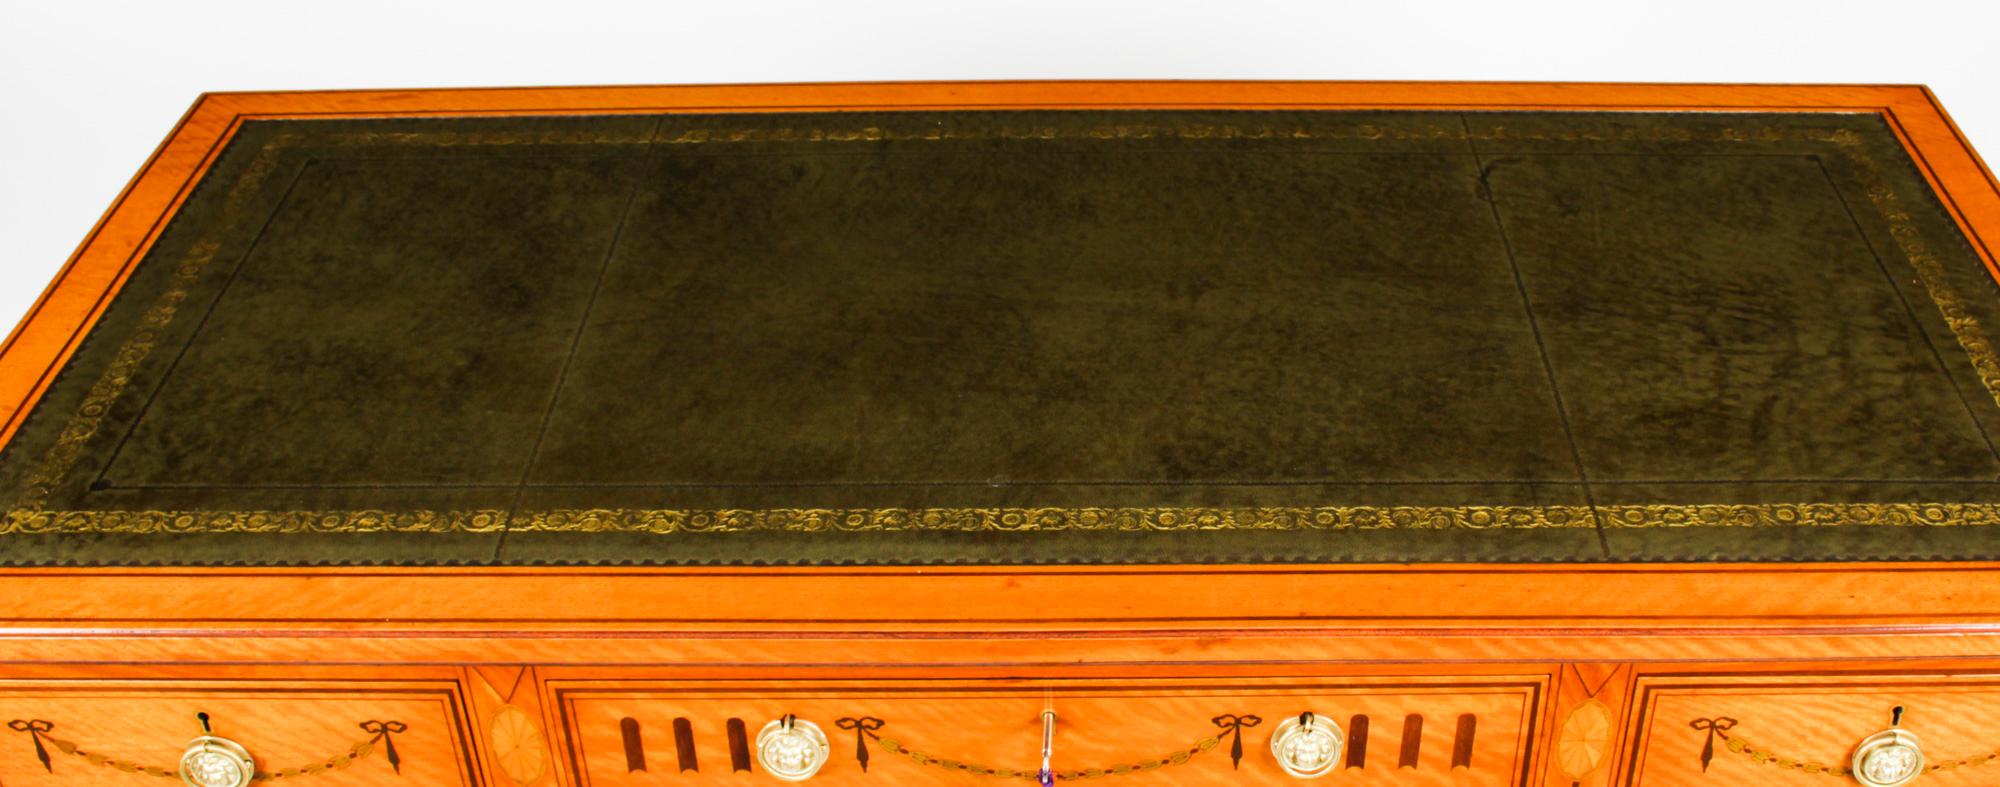 Antique Inlaid Satinwood Writing Table Desk by Edwards & Roberts, 19th Century 4